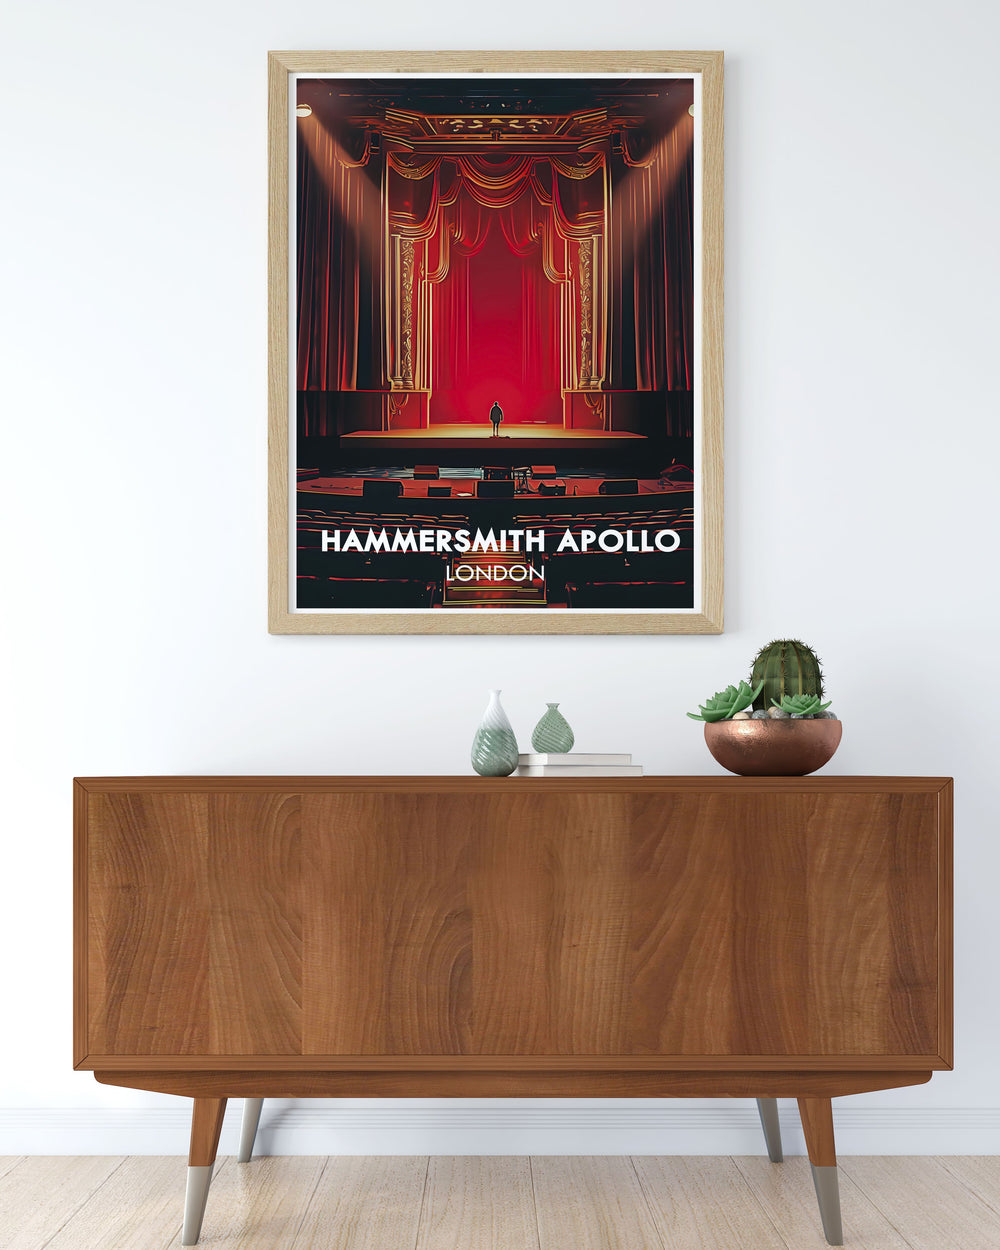 Highlighting the architectural beauty of Hammersmith Apollo, this travel poster offers a glimpse into the venues rich history and cultural importance.